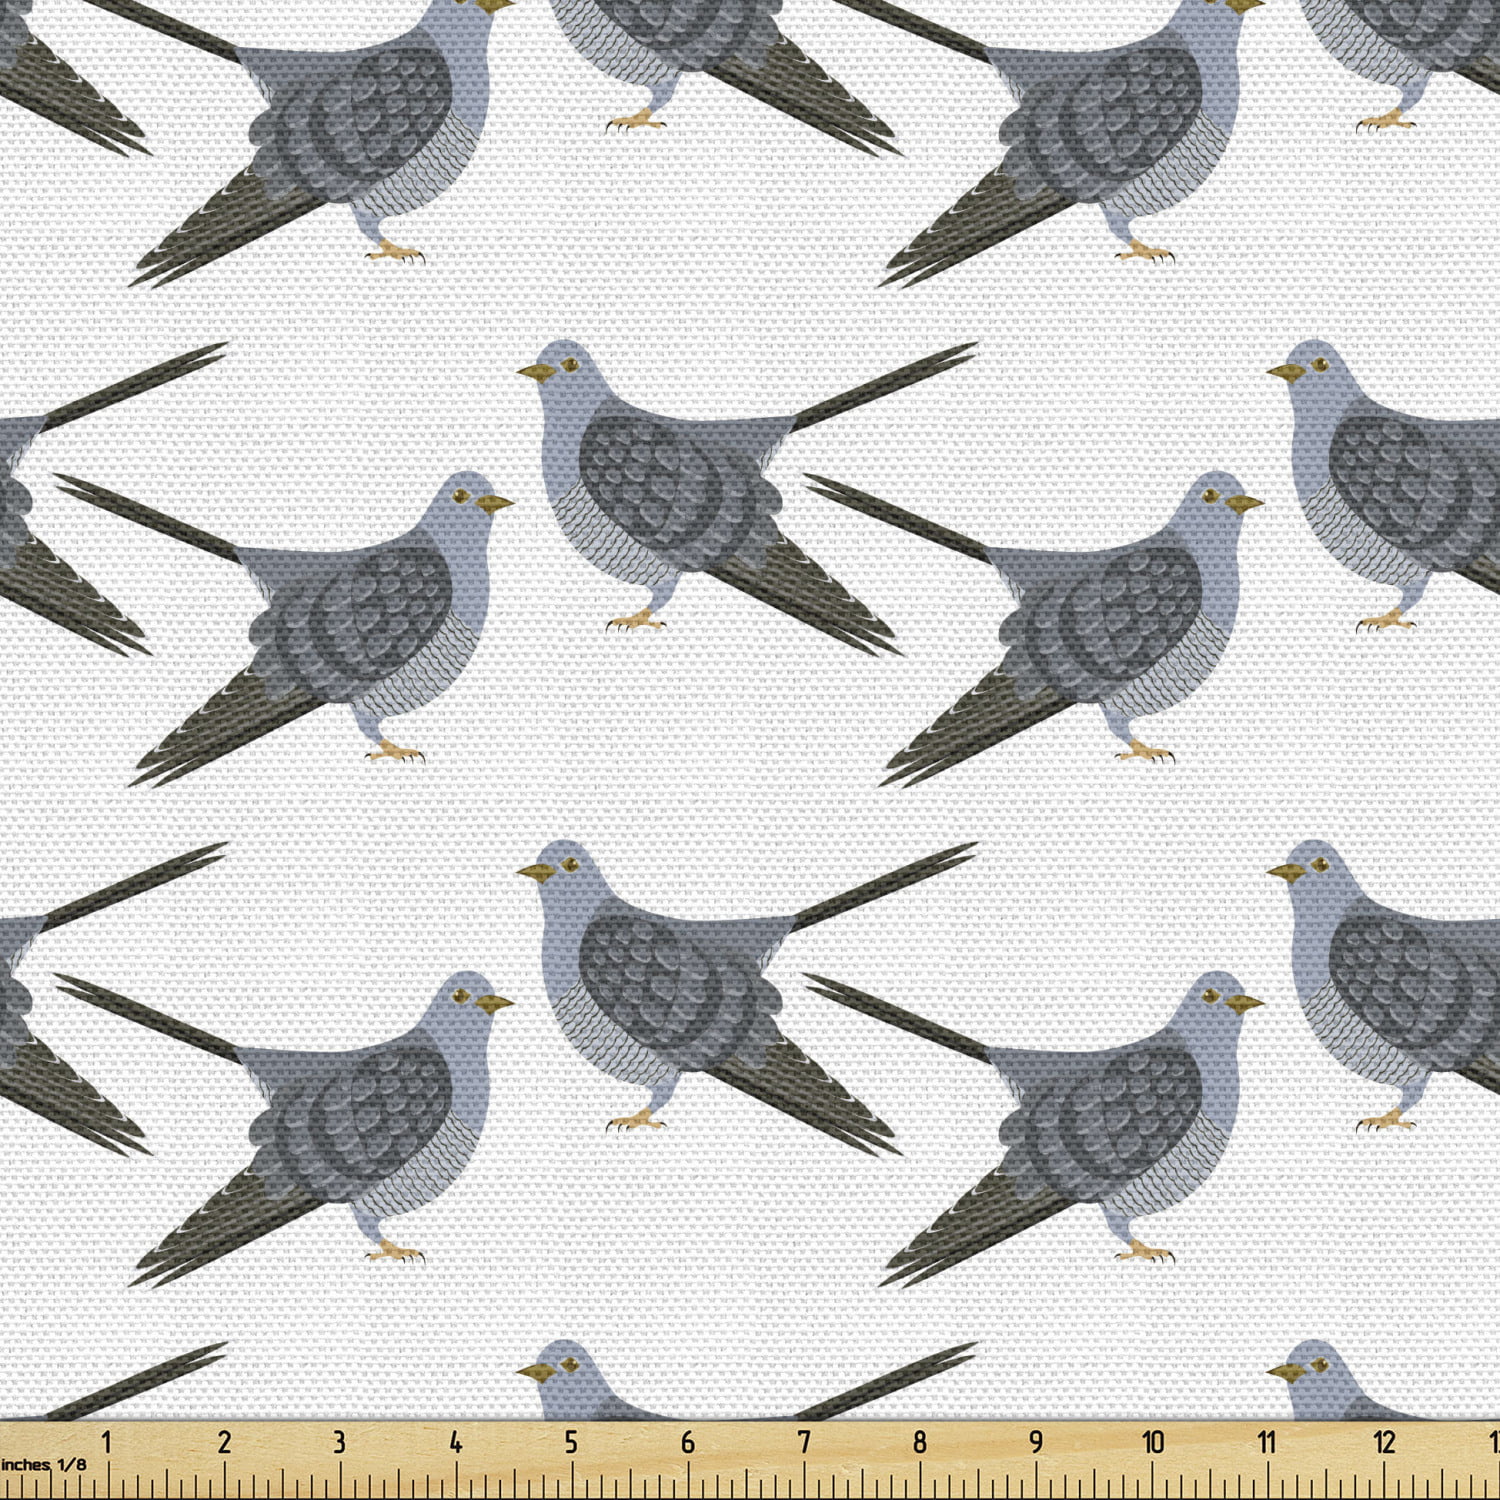 Cotton Canvas Fabric Doves Birds Flying Upholstery 150cm Wide 